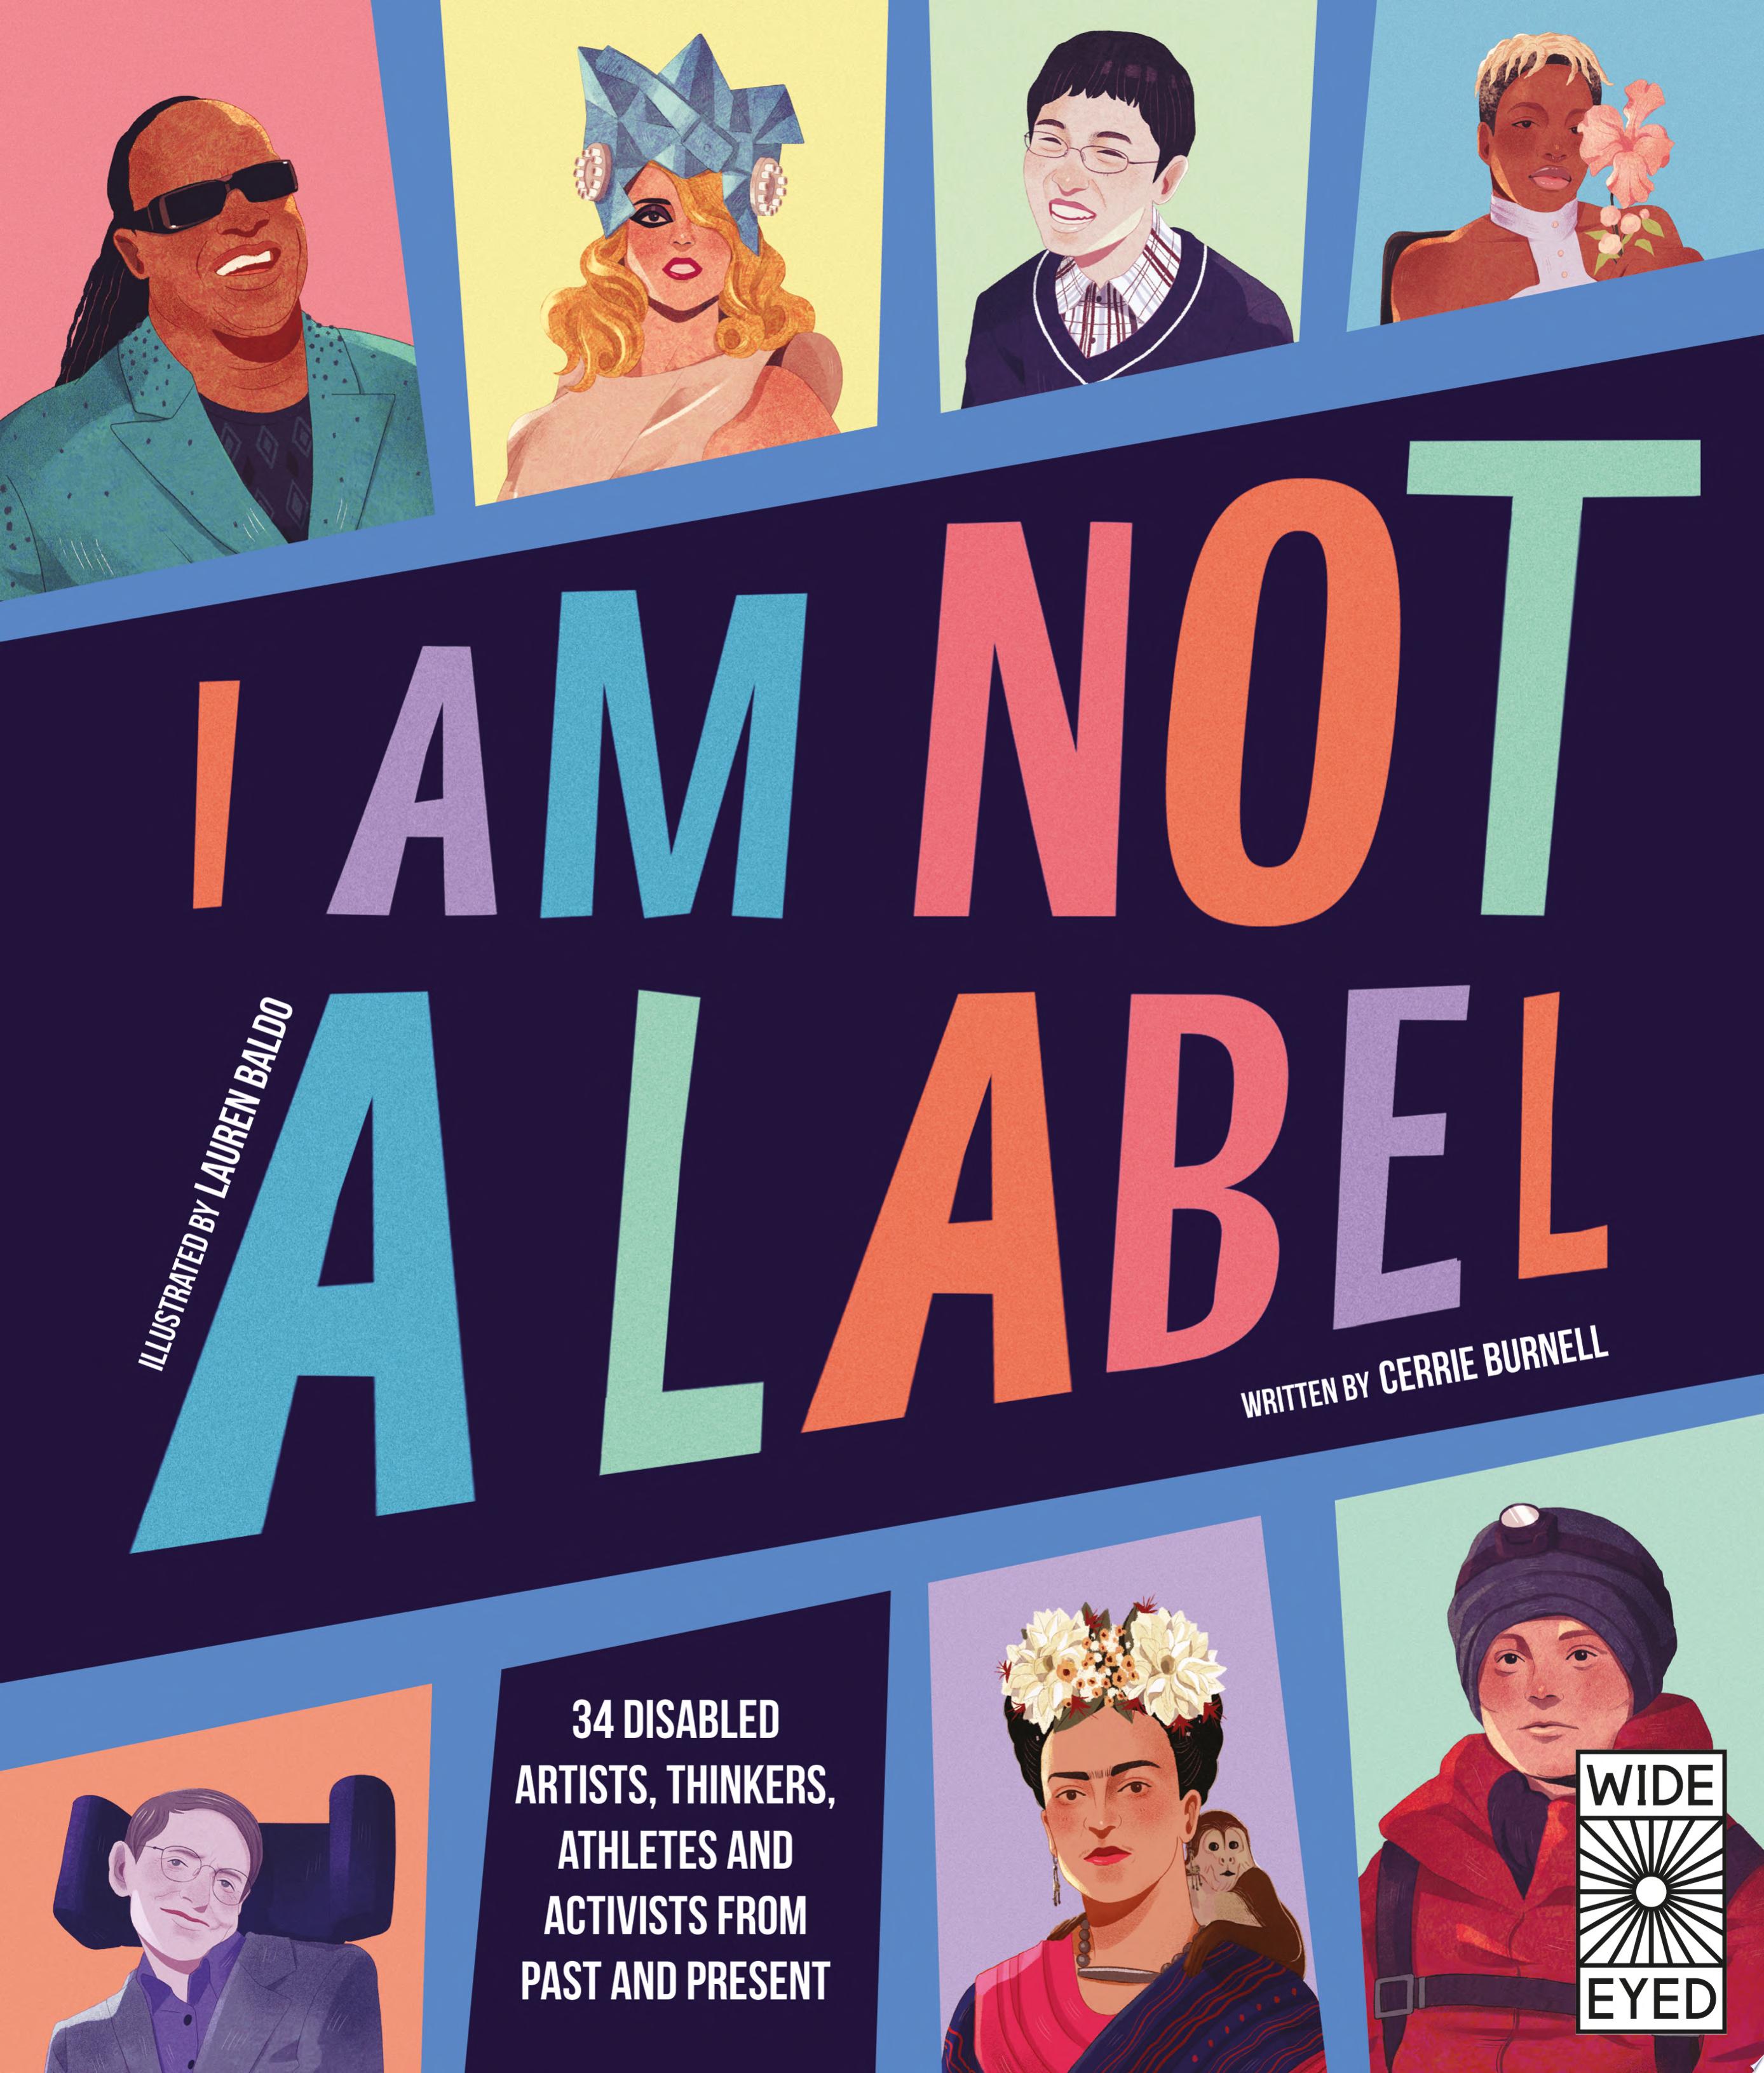 Image for "I Am Not a Label"